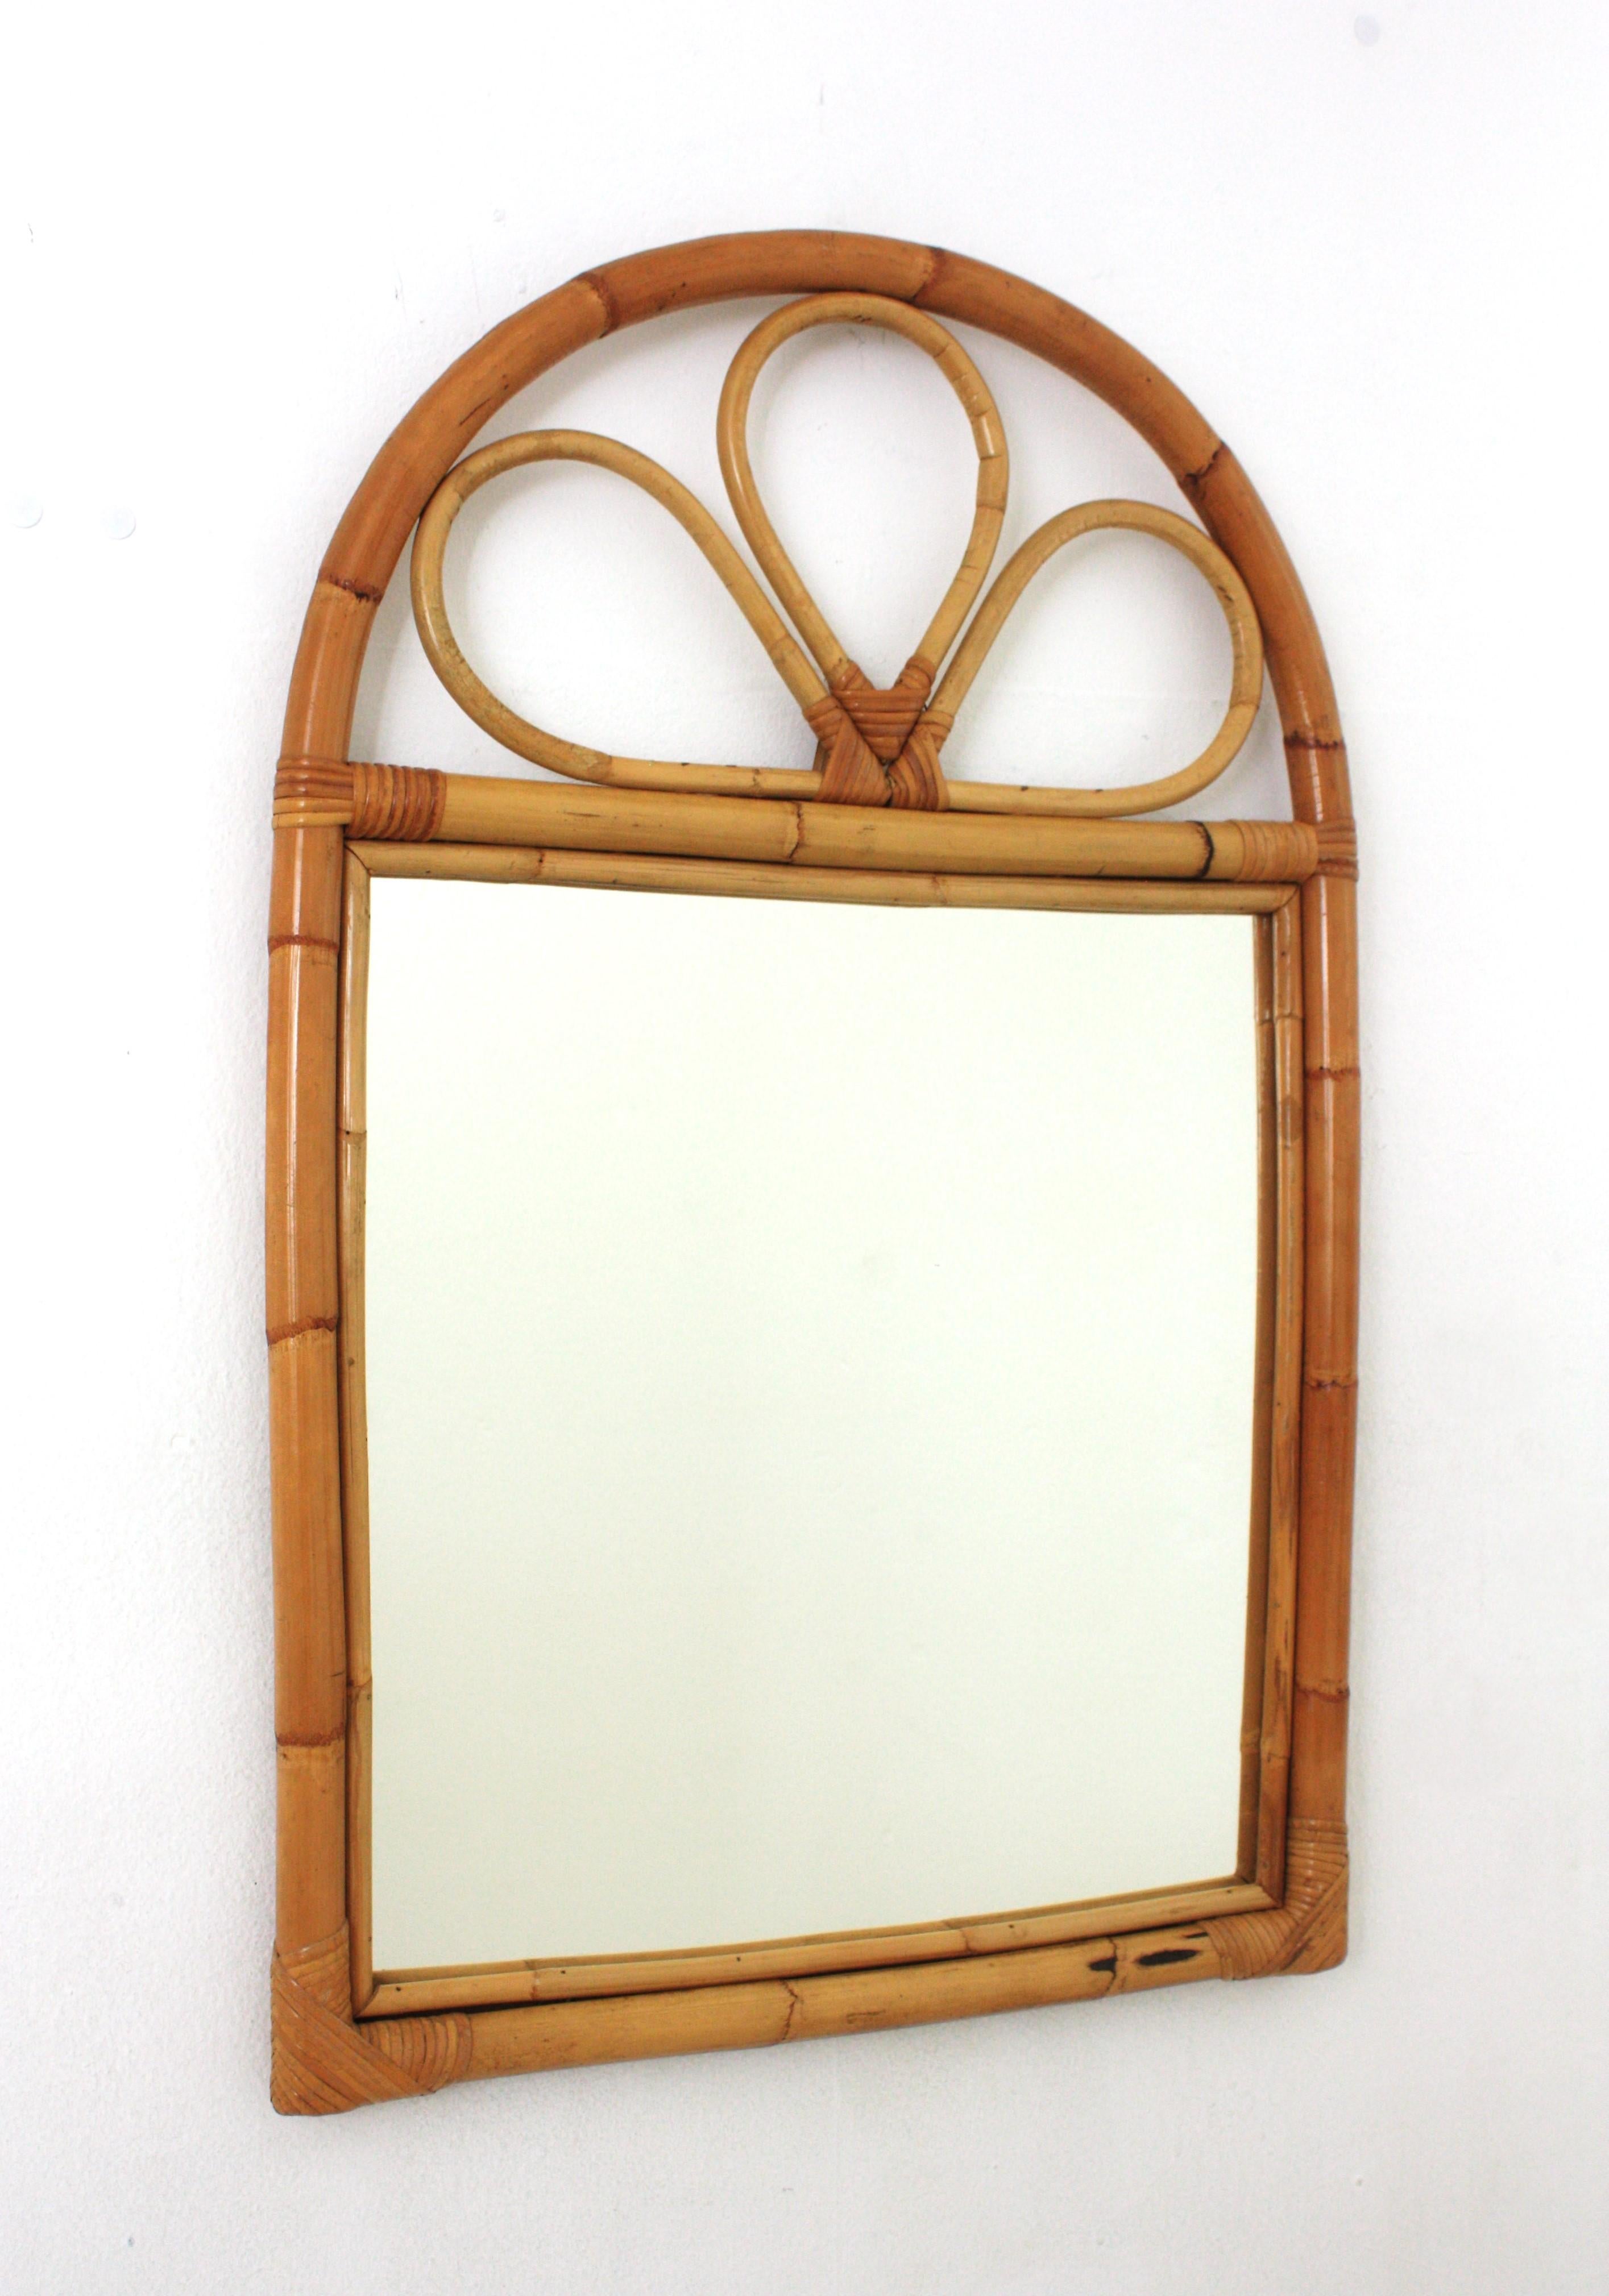 Mid-century Modern Rattan mirror with arched top. Spain, 1960s
This beautiful mirror was handcrafted with bamboo cane and rattan combining Midcentury and Coastal accents. It features a thick rattan bamboo cane with loop details on the arched top.
It